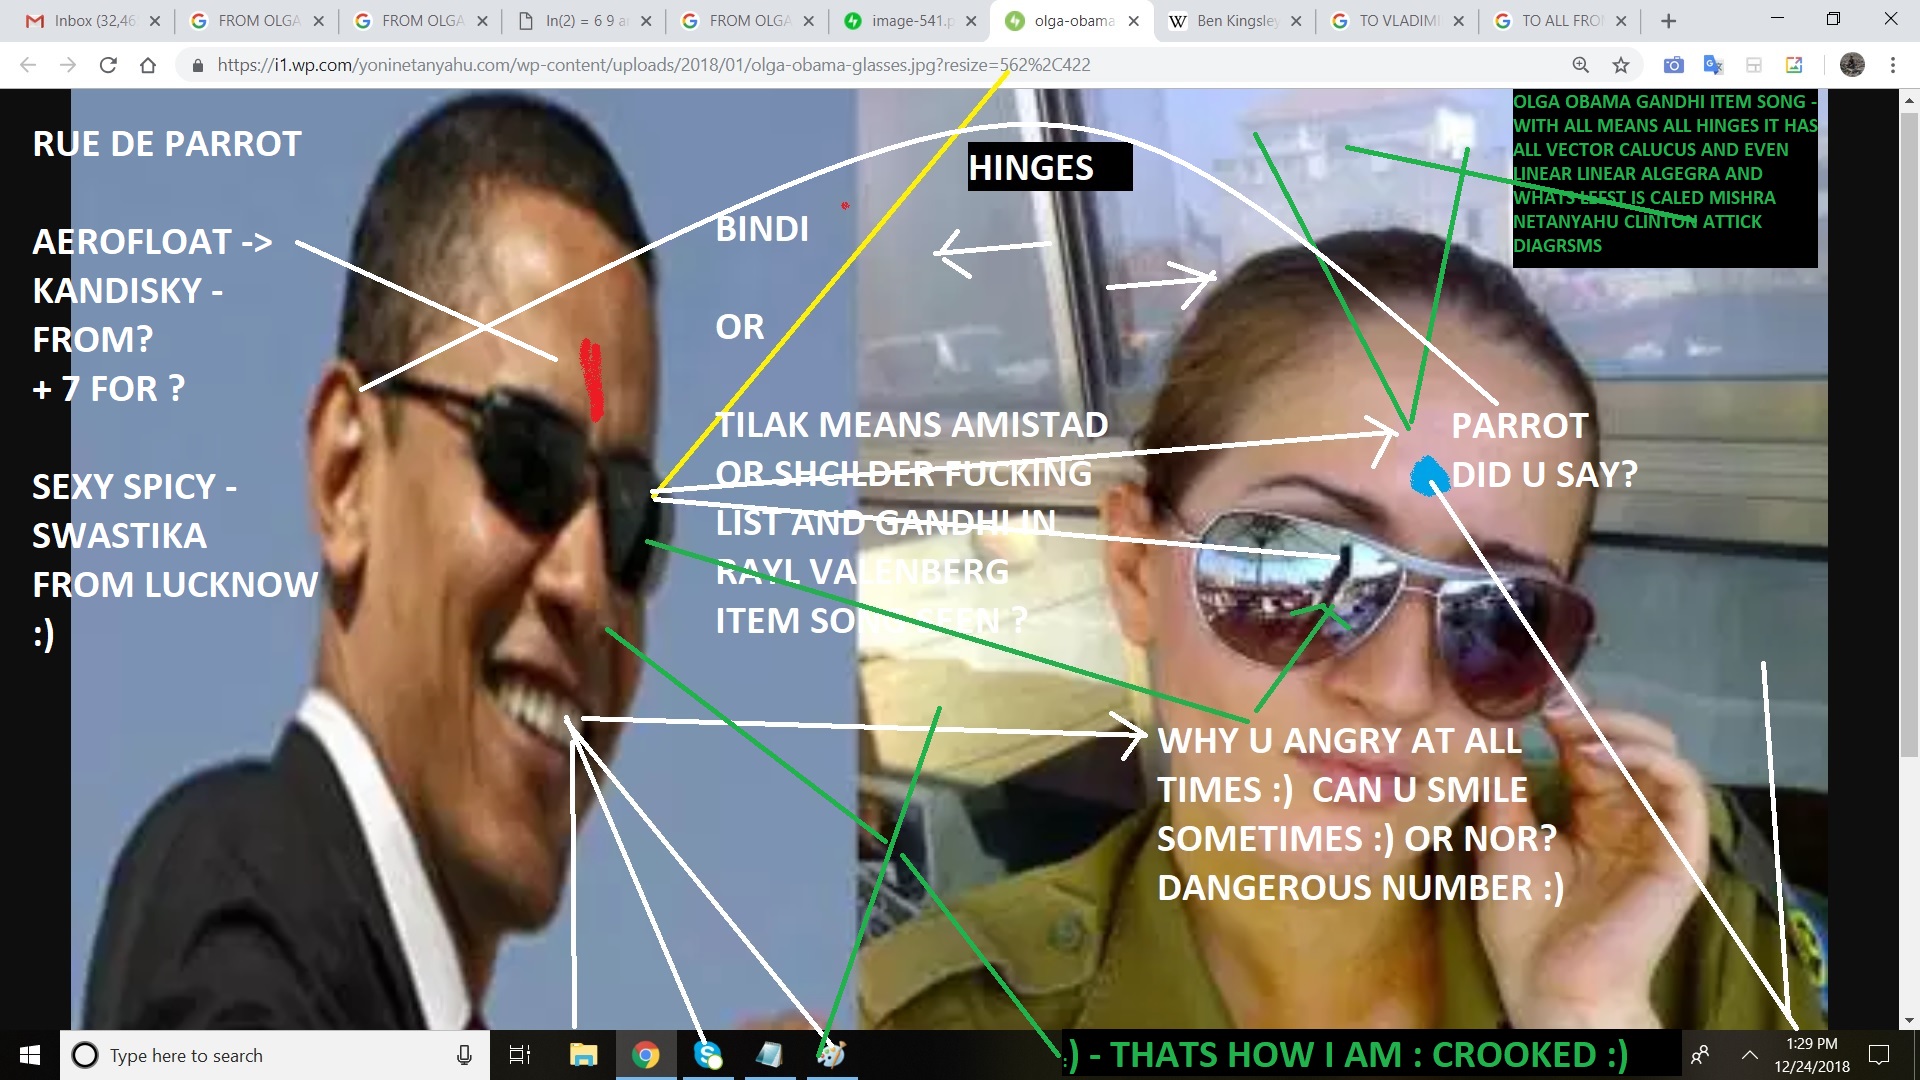 GANDHI OBAMA GANDHI ITEM SONG - WITH ALL MEANS ALL HINGES IT HAS ALL VECTOR CALUCUS AND EVEN LINEAR LINEAR ALGEGRA AND WHATS LEFST IS CALED MISHRA NETANYAHU CLINTON ATTICK DIAGRSMS